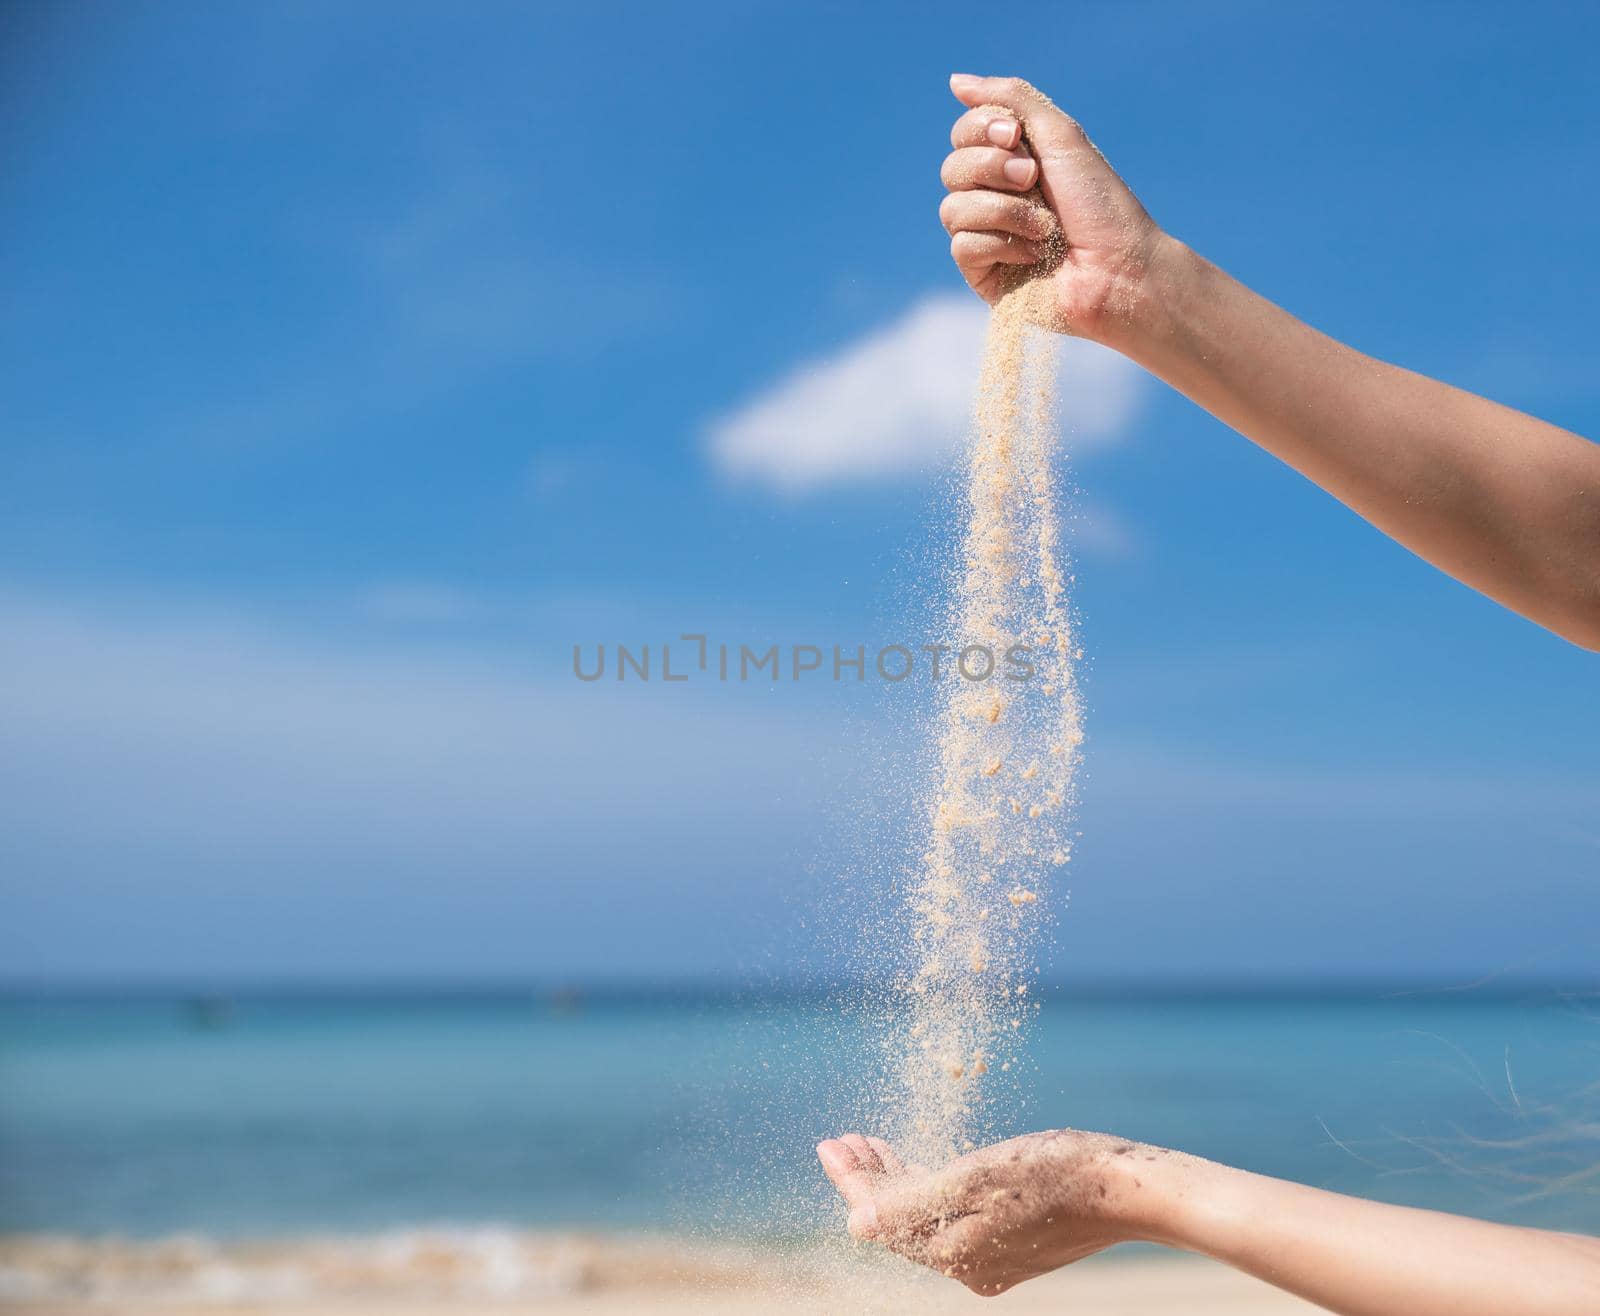 Woman pouring the sand from hand to hand on the beach, blue sky.